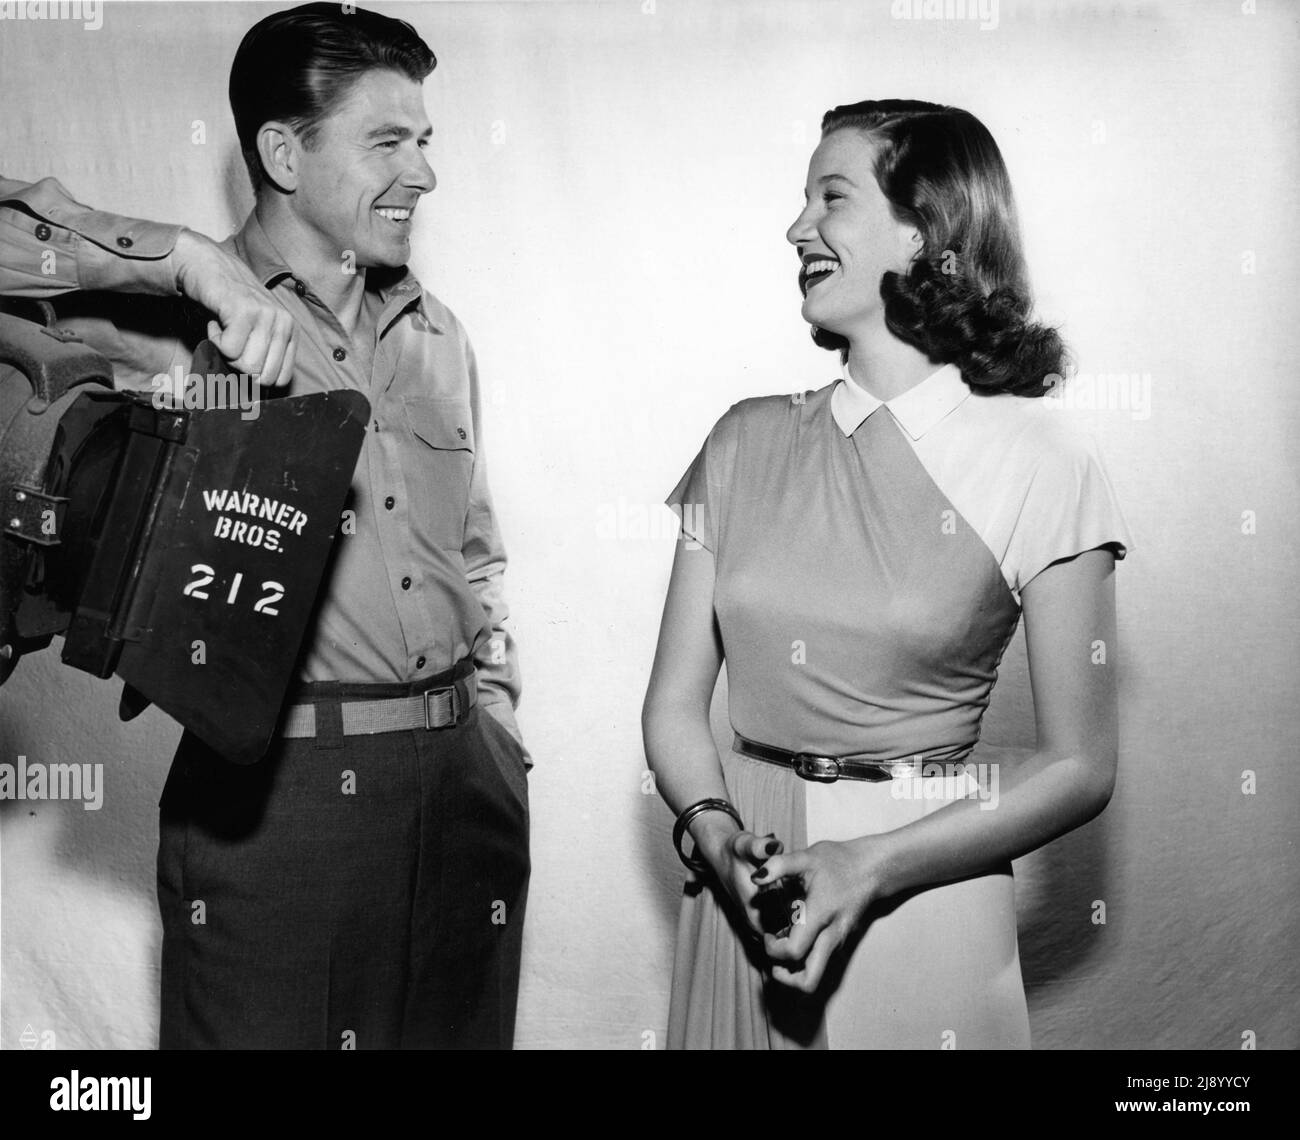 Actor and President of the Screen Actors' Guild RONALD REAGAN on set candid at Warner Bros. Burbank Studio with set visitor new Canadian Contract Player LOIS MAXWELL during filming of THE VOICE OF THE TURTLE 1947 director IRVING RAPPER play / screenplay John Van Druten Warner Bros. Stock Photo